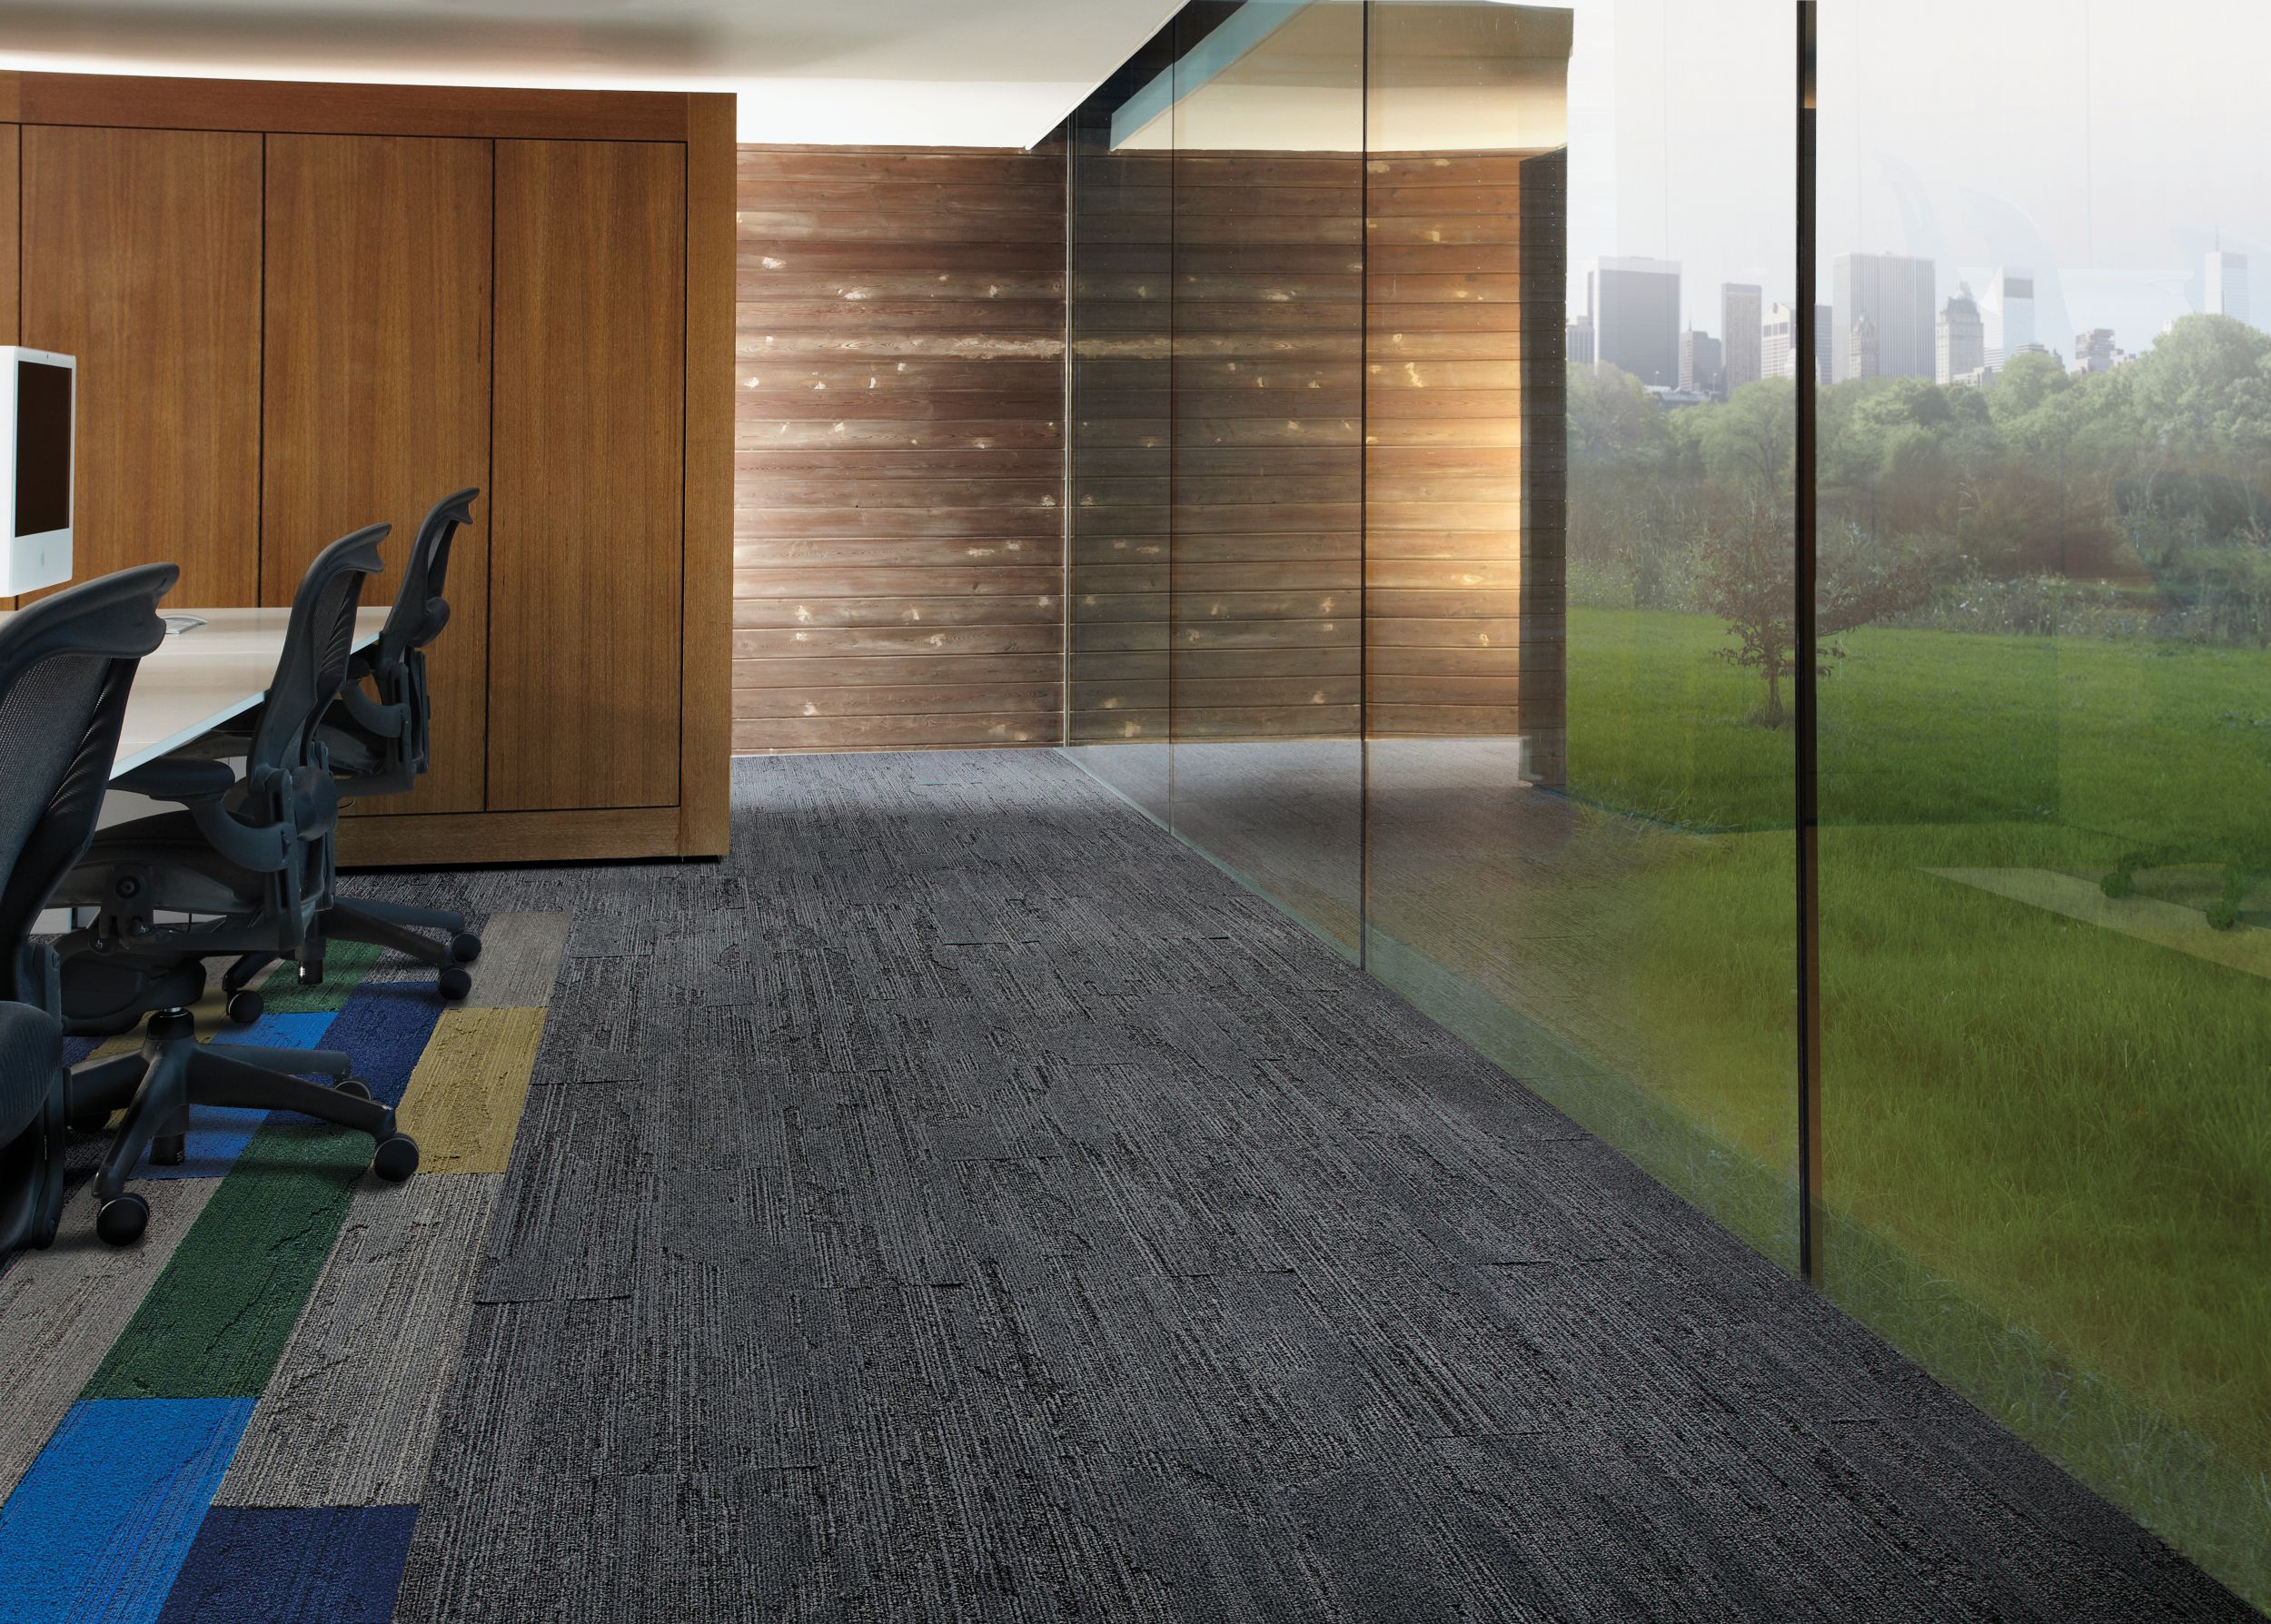 Interface UR501 plank carpet tile in multiple colors in meeting room with large windows Bildnummer 8